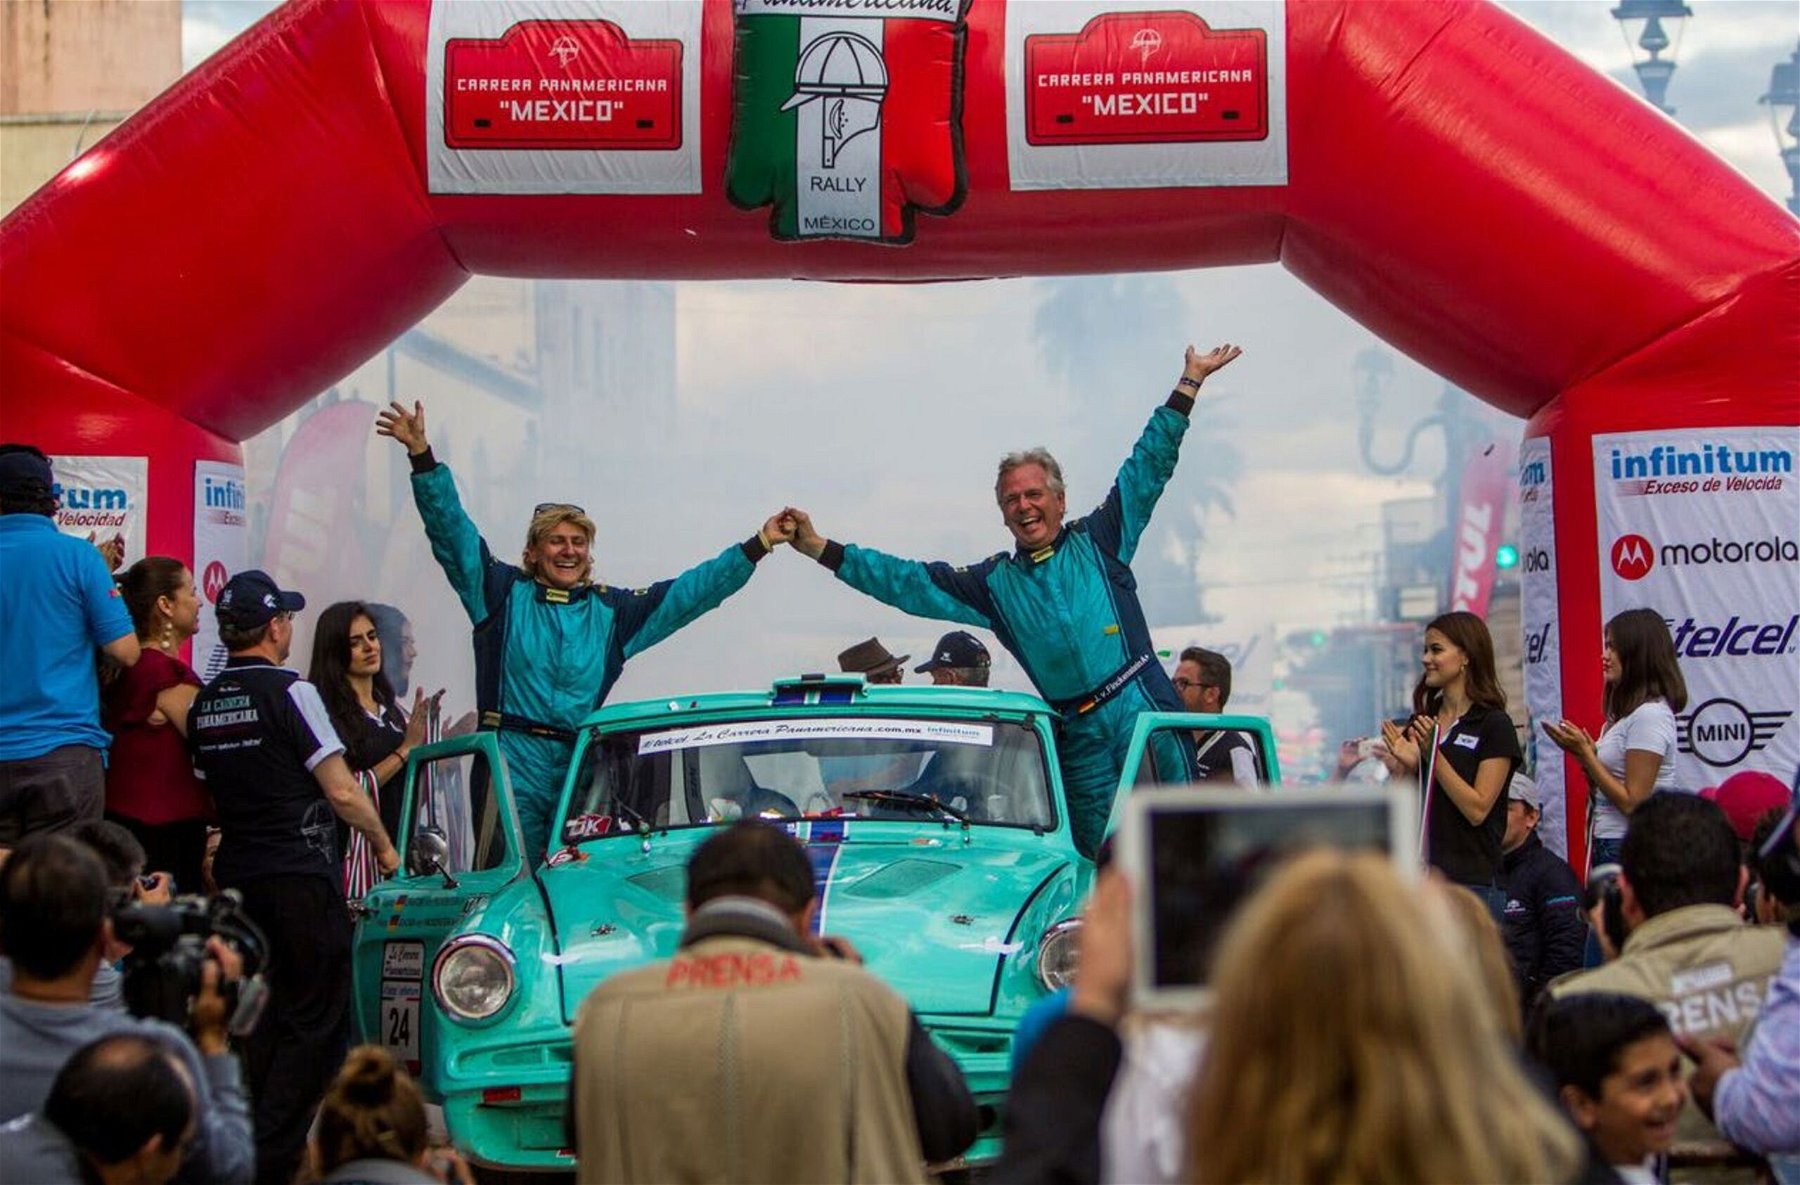 Dr. Joachim Graf von Finckenstein is the organizer of the Target Bavaria Rallye. He finished the Panamericana in Mexico